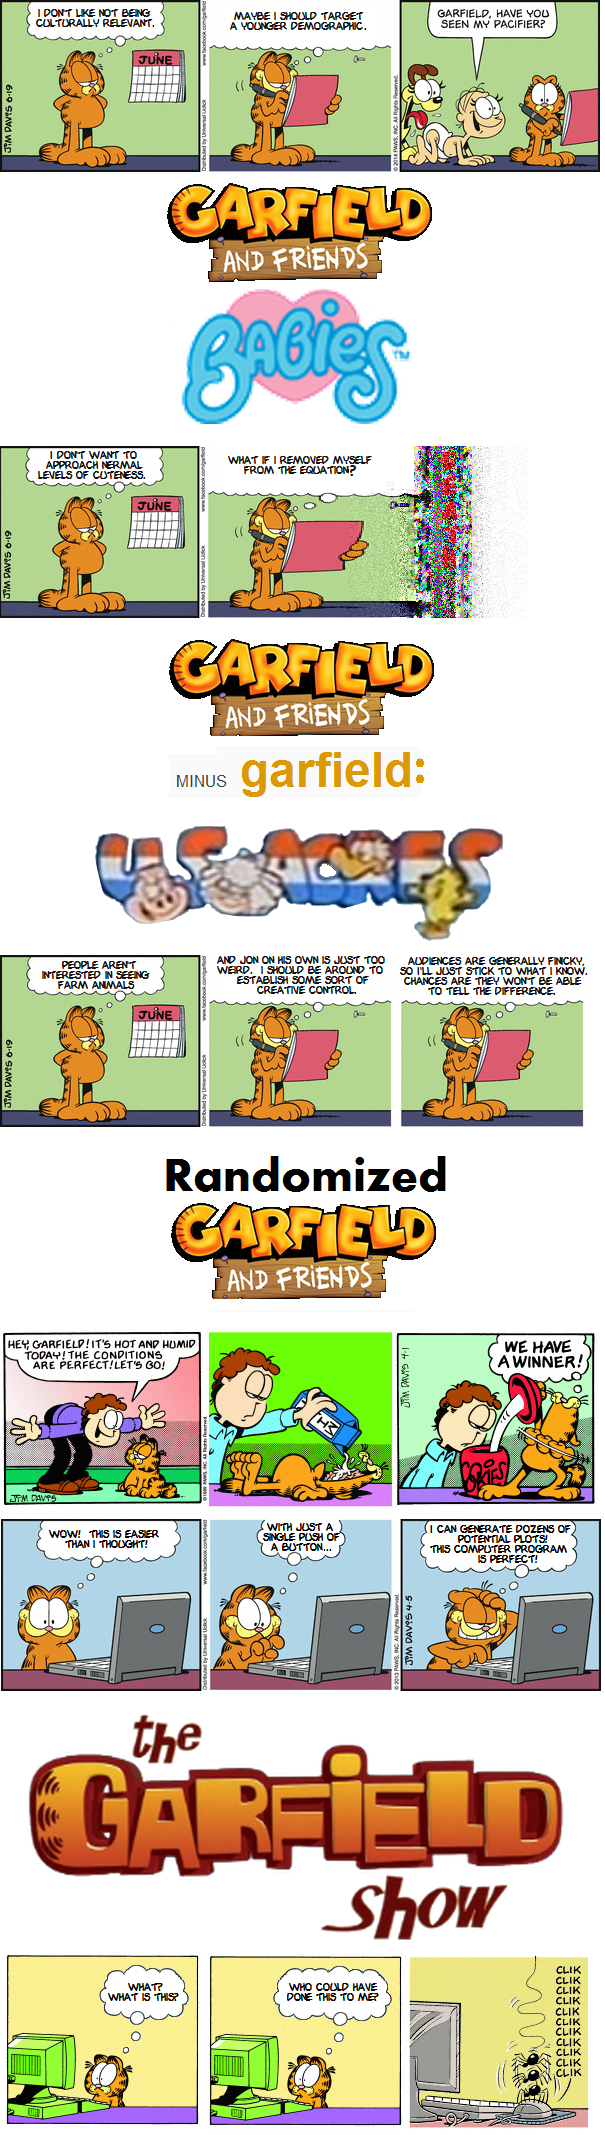 Square Root of Garfield and Friends